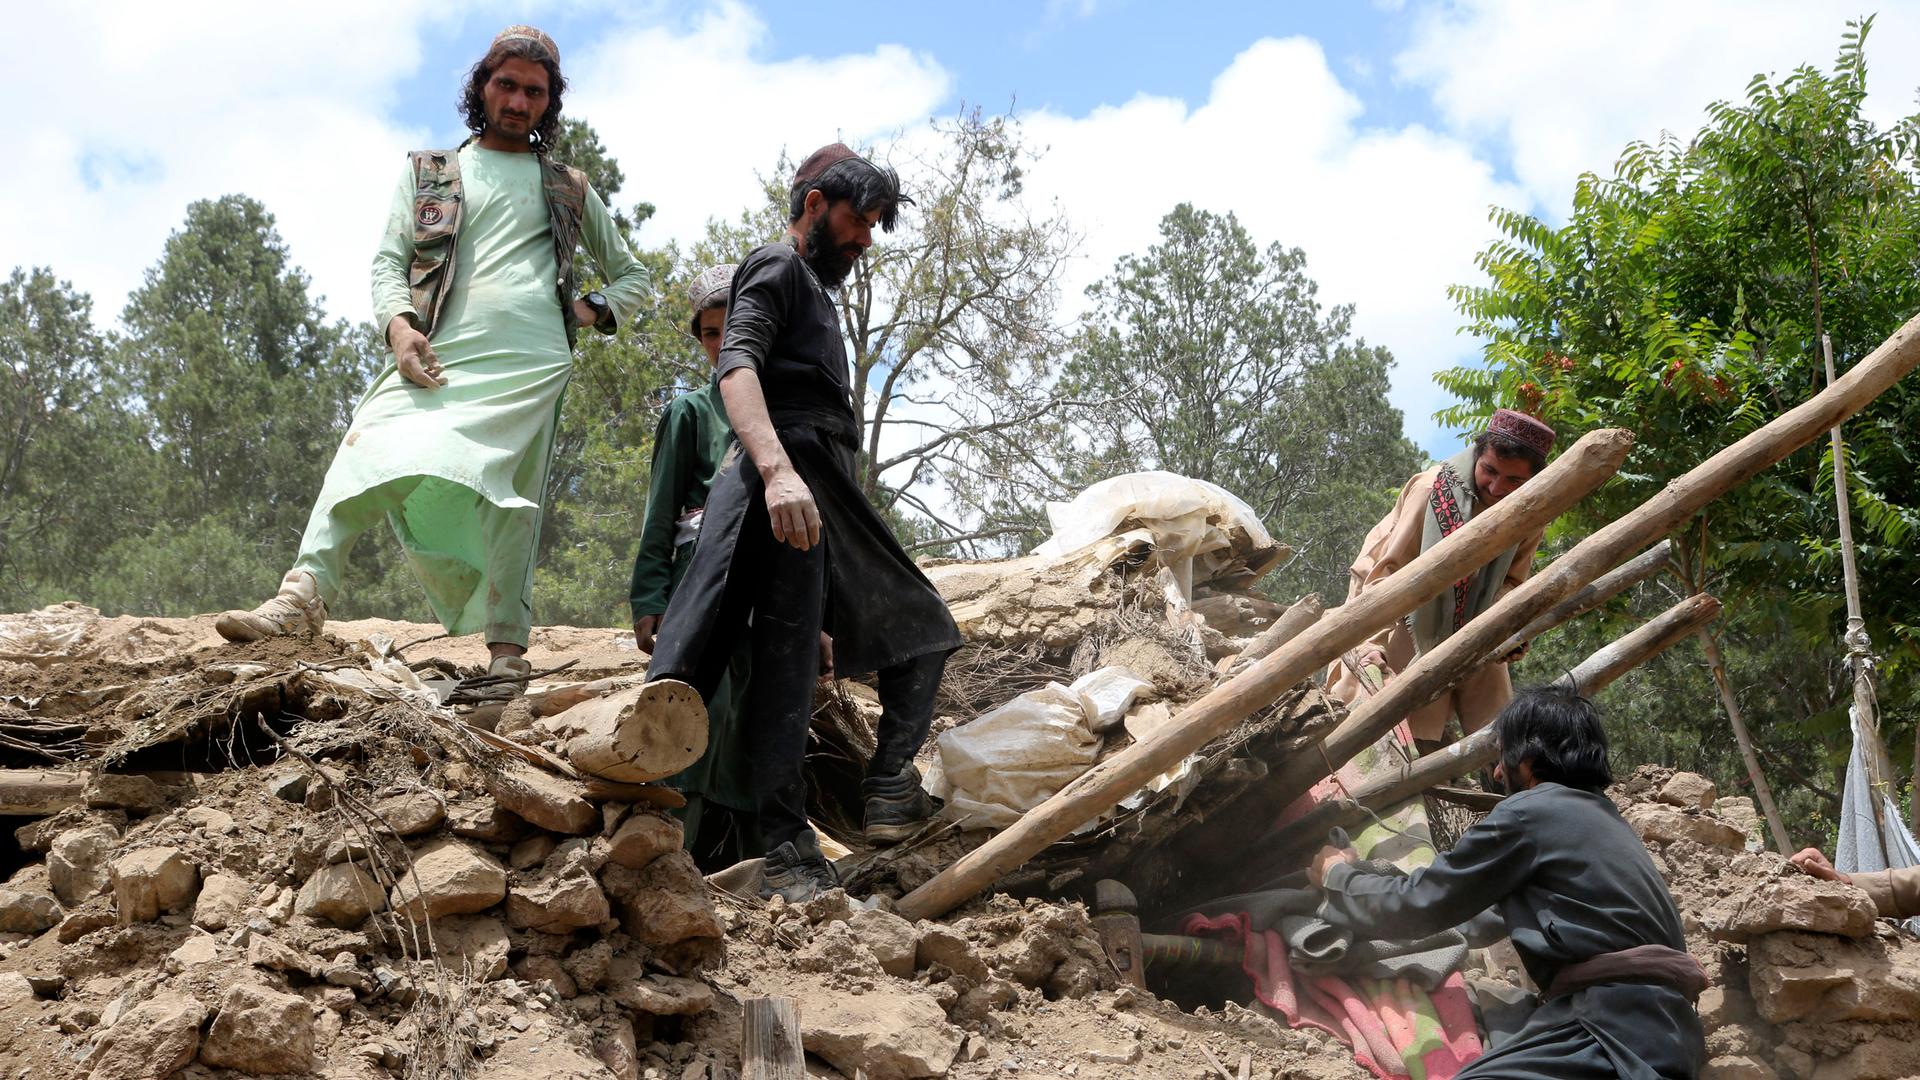 Afghan villagers collects belongings from under the rubble of a home that was destroyed in an earthquake in the Spera District of the southwestern part of Khost Province, Afghanistan, Wednesday, June 22, 2022. 